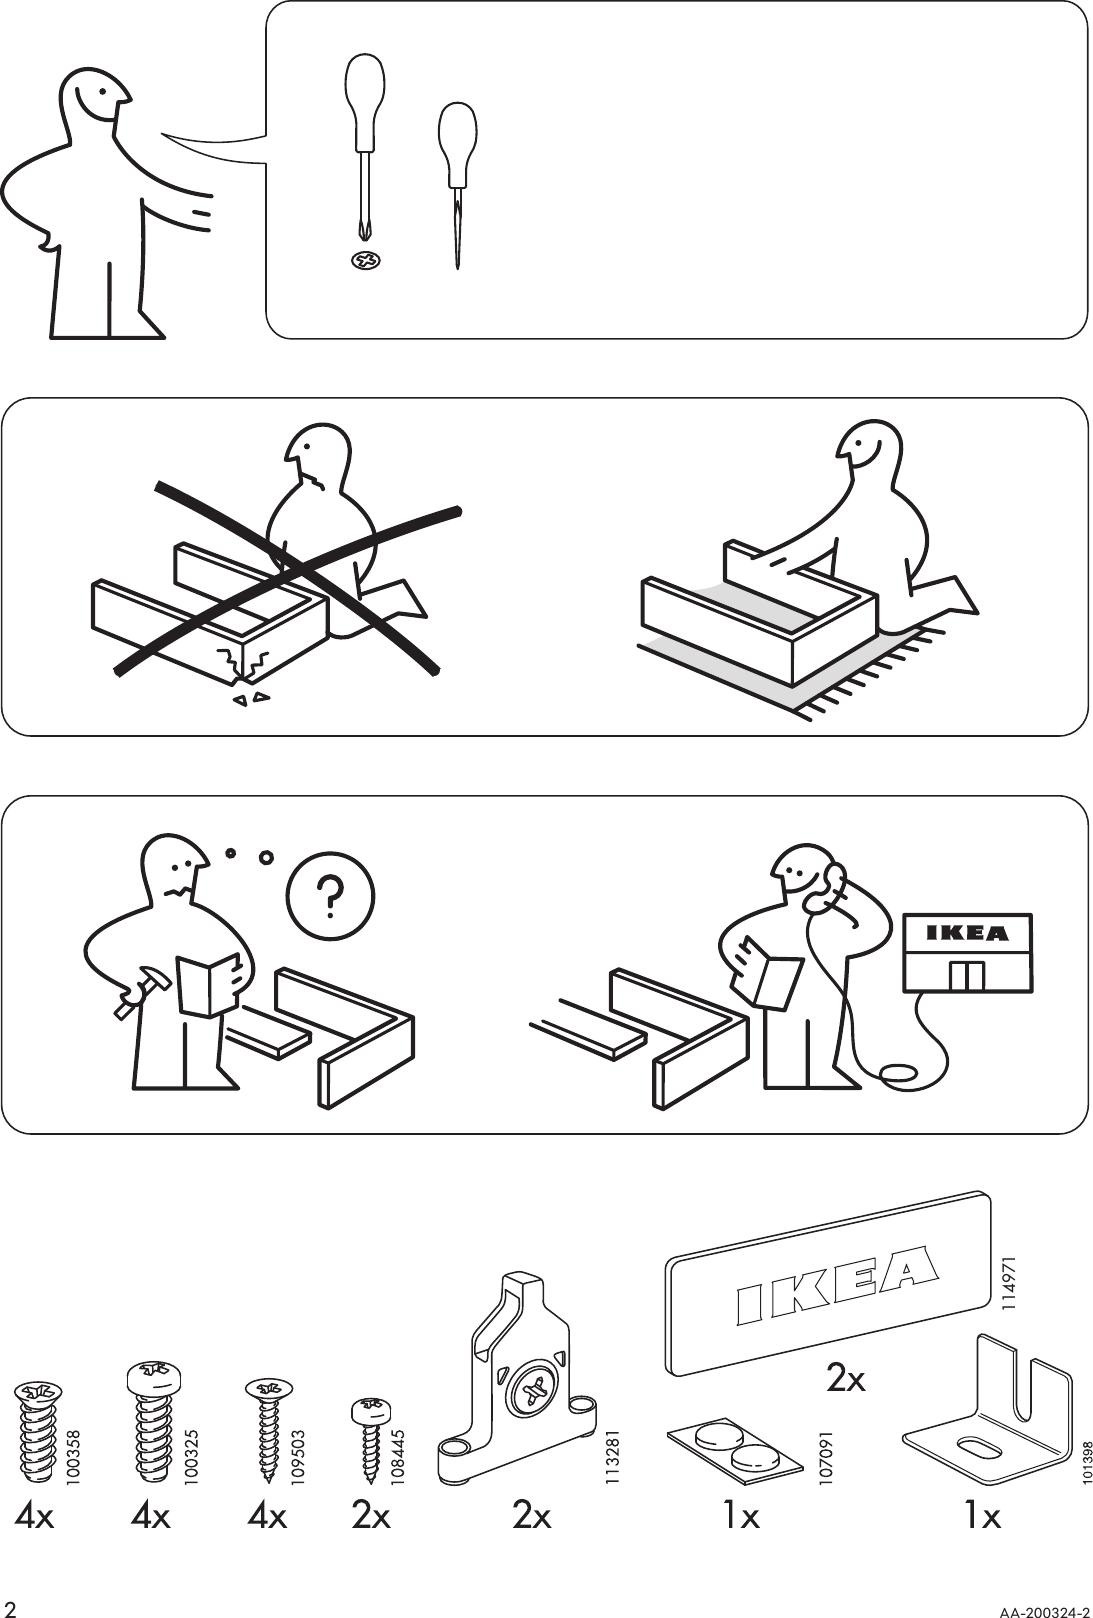 Page 2 of 8 - Ikea Ikea-Rationell-Deep-Full-Extending-Drawer-30-Assembly-Instruction